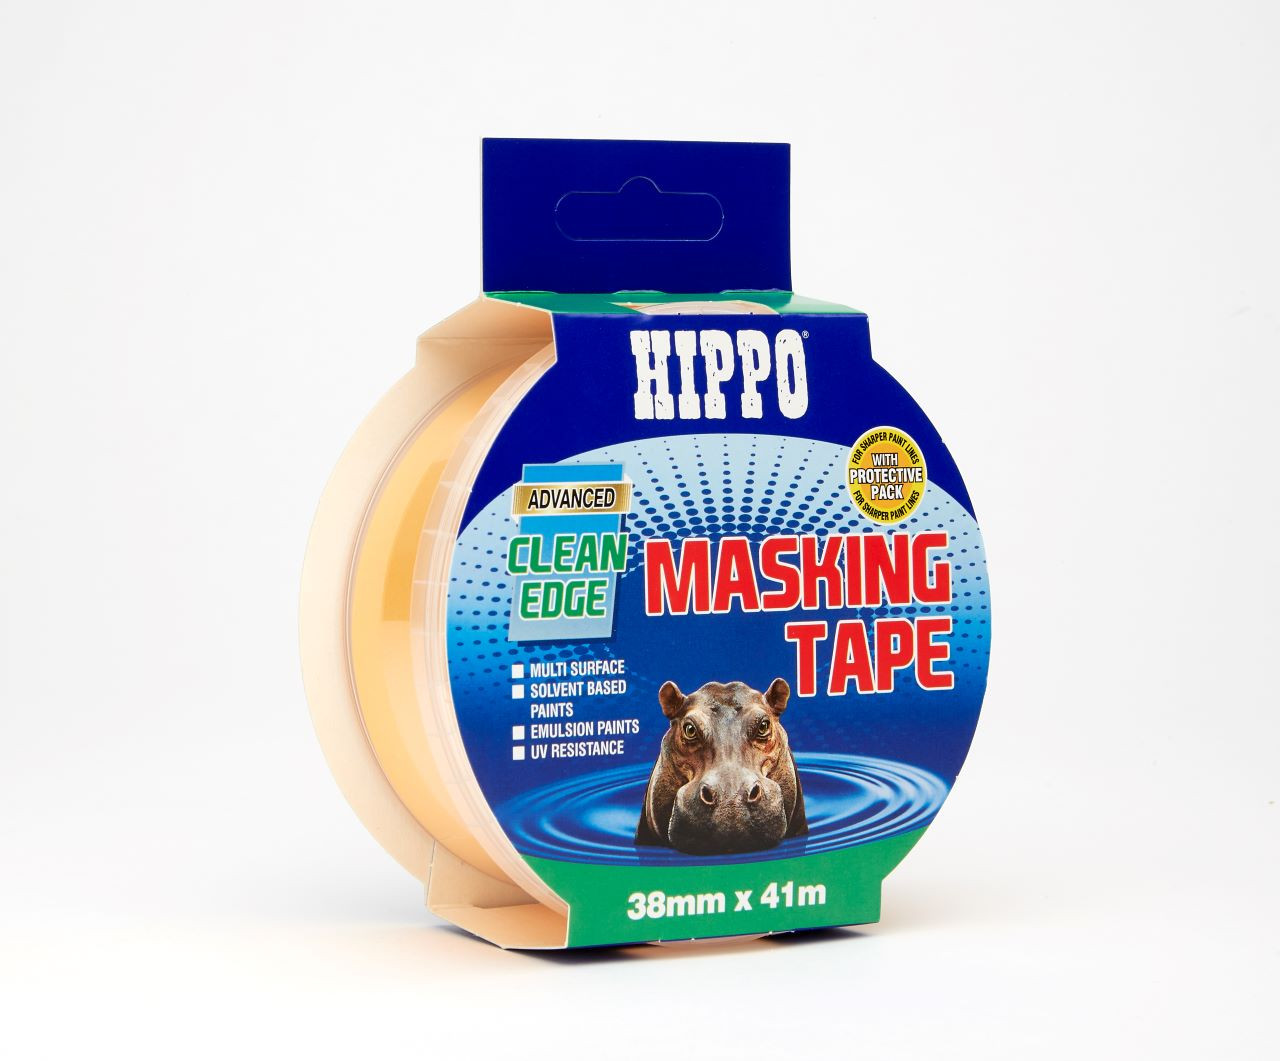 Photograph of Hippo Clean Edge Masking Tape 28mm x 41m